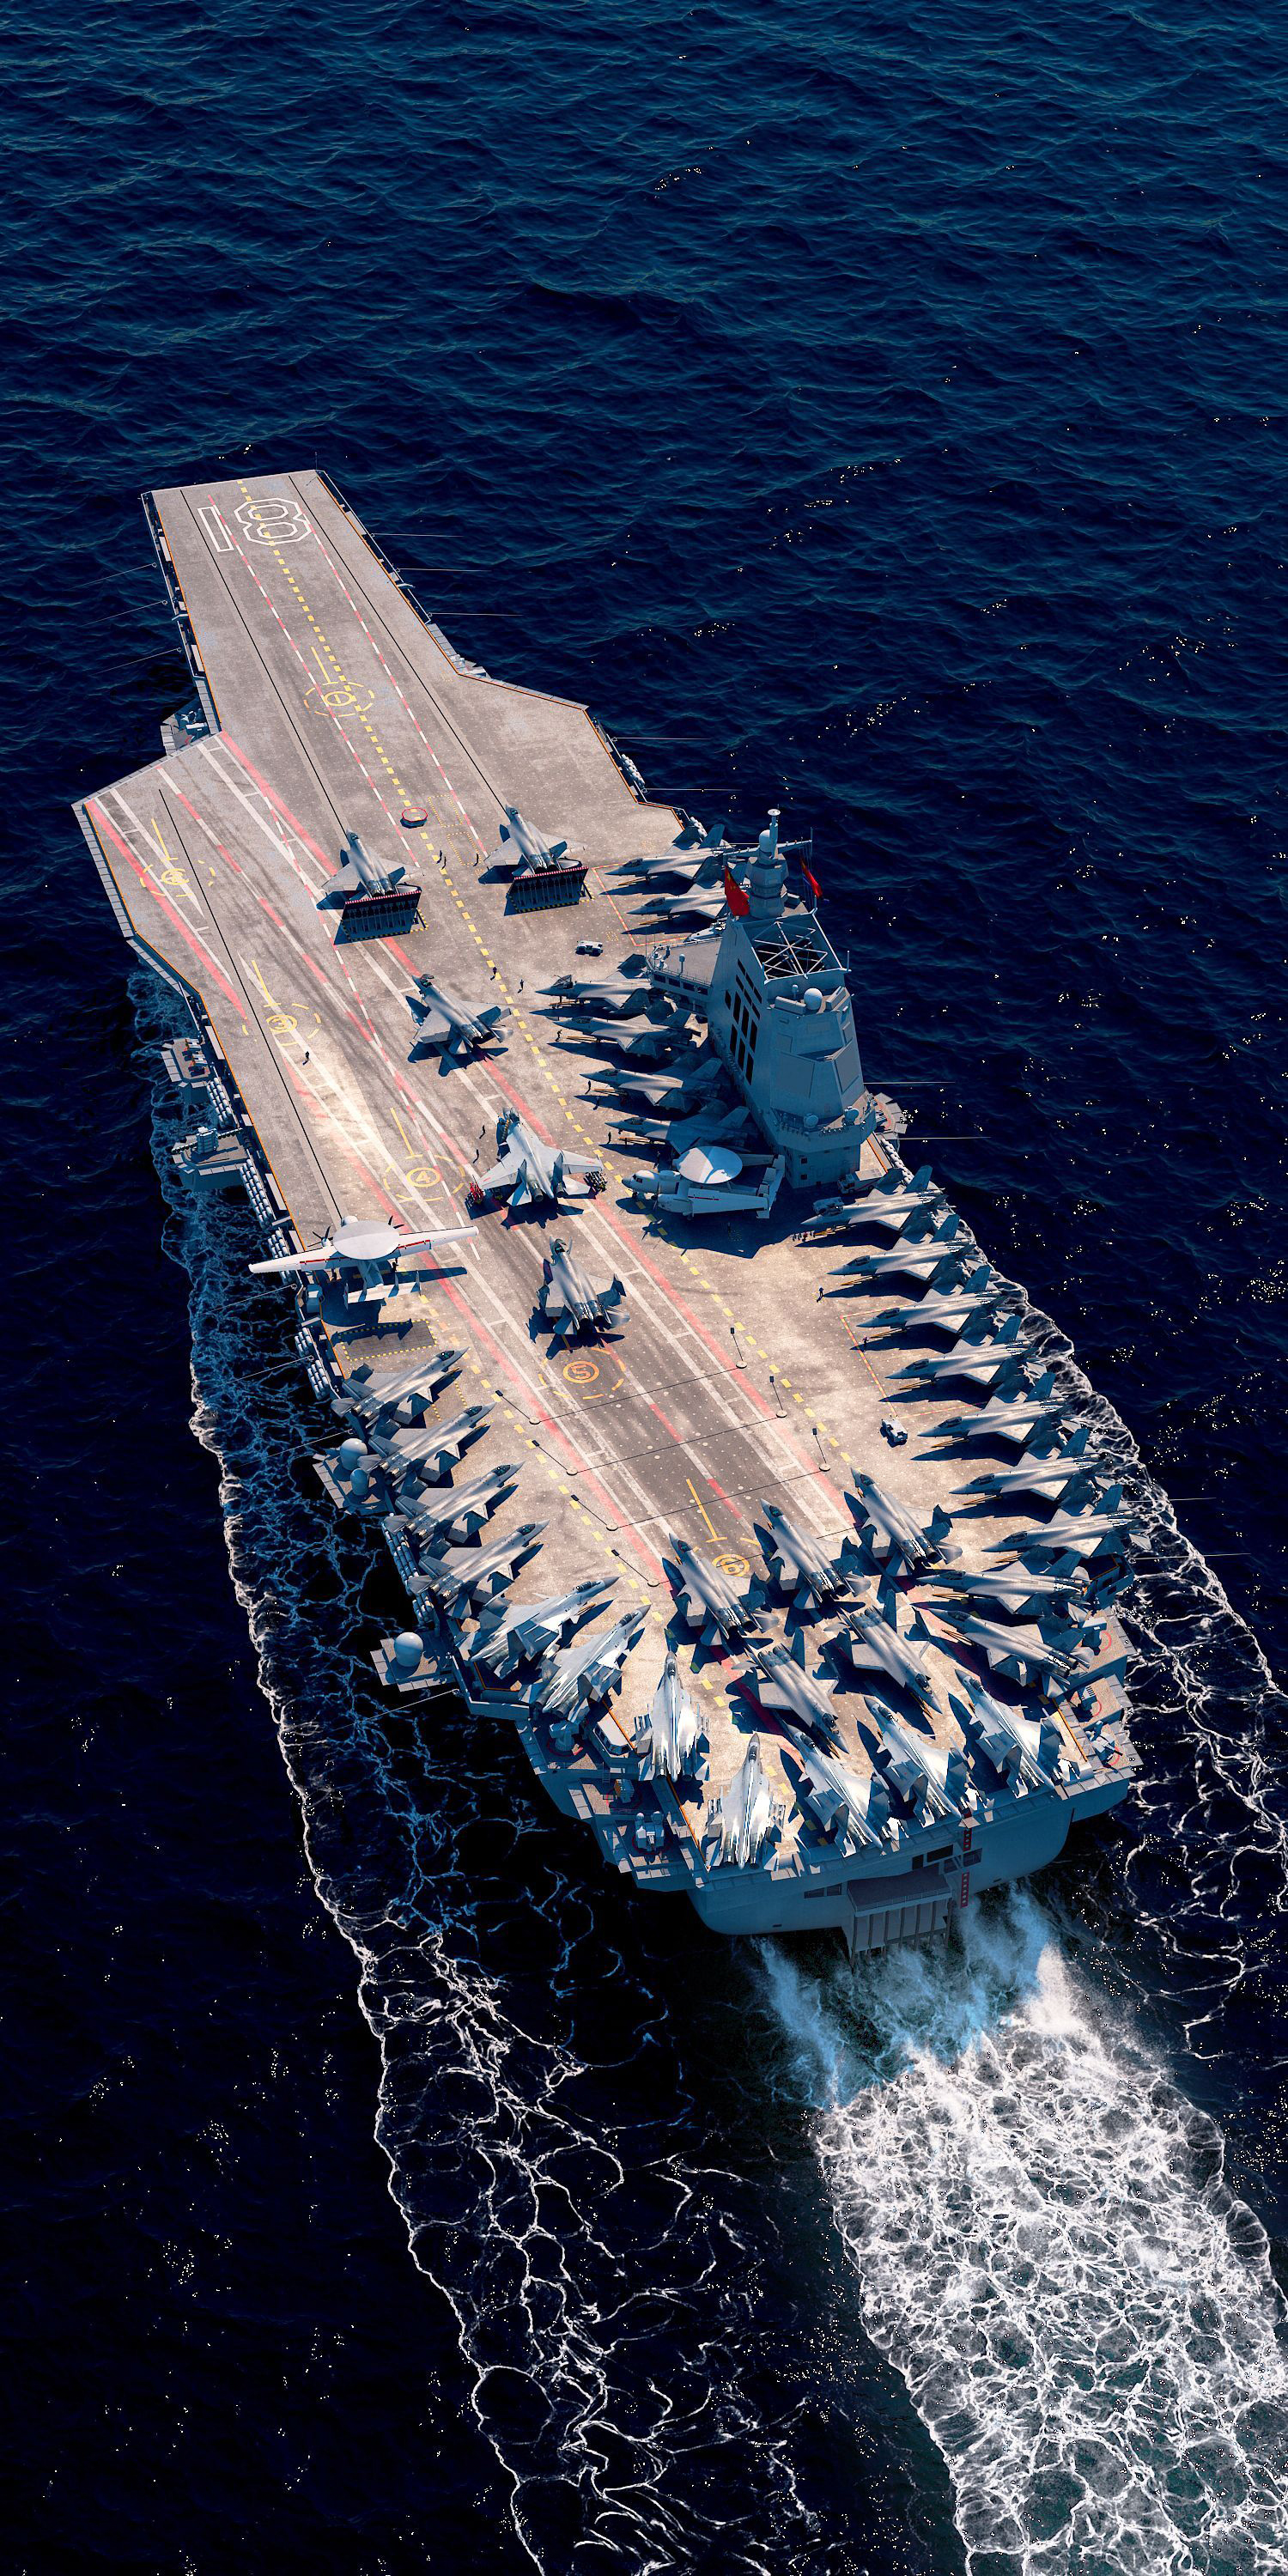 General 1500x3000 Type 001 aircraft carrier People's Liberation Army Navy GaoShan CG water ripples sea top view military aircraft military military vehicle portrait display